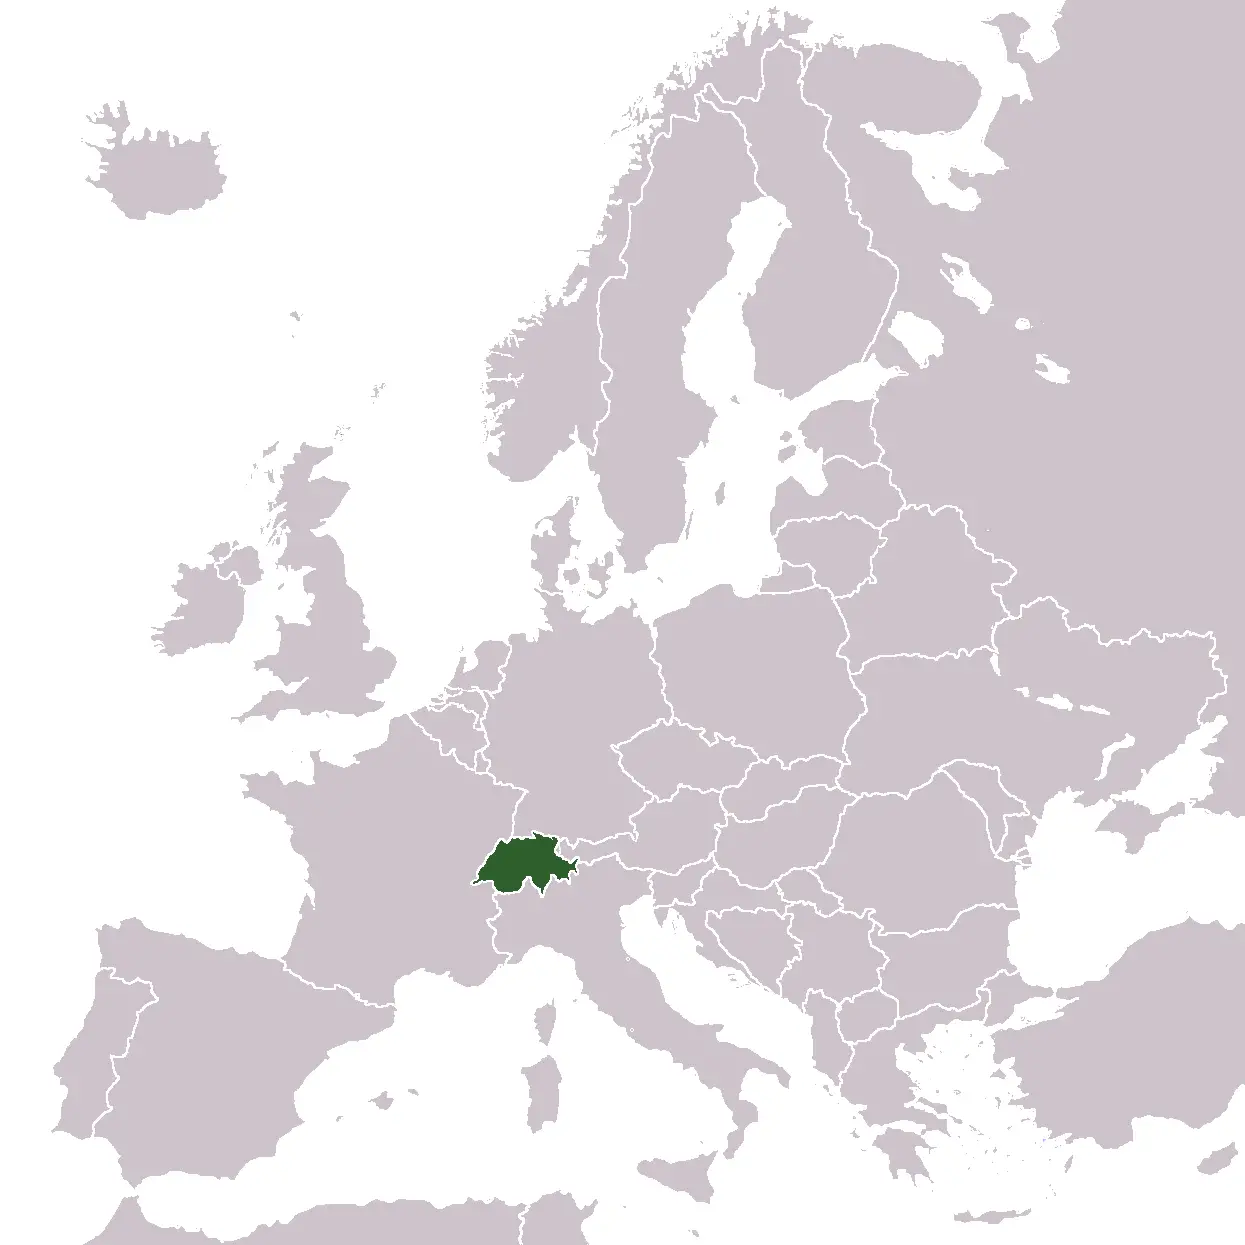 Europe Location Ch